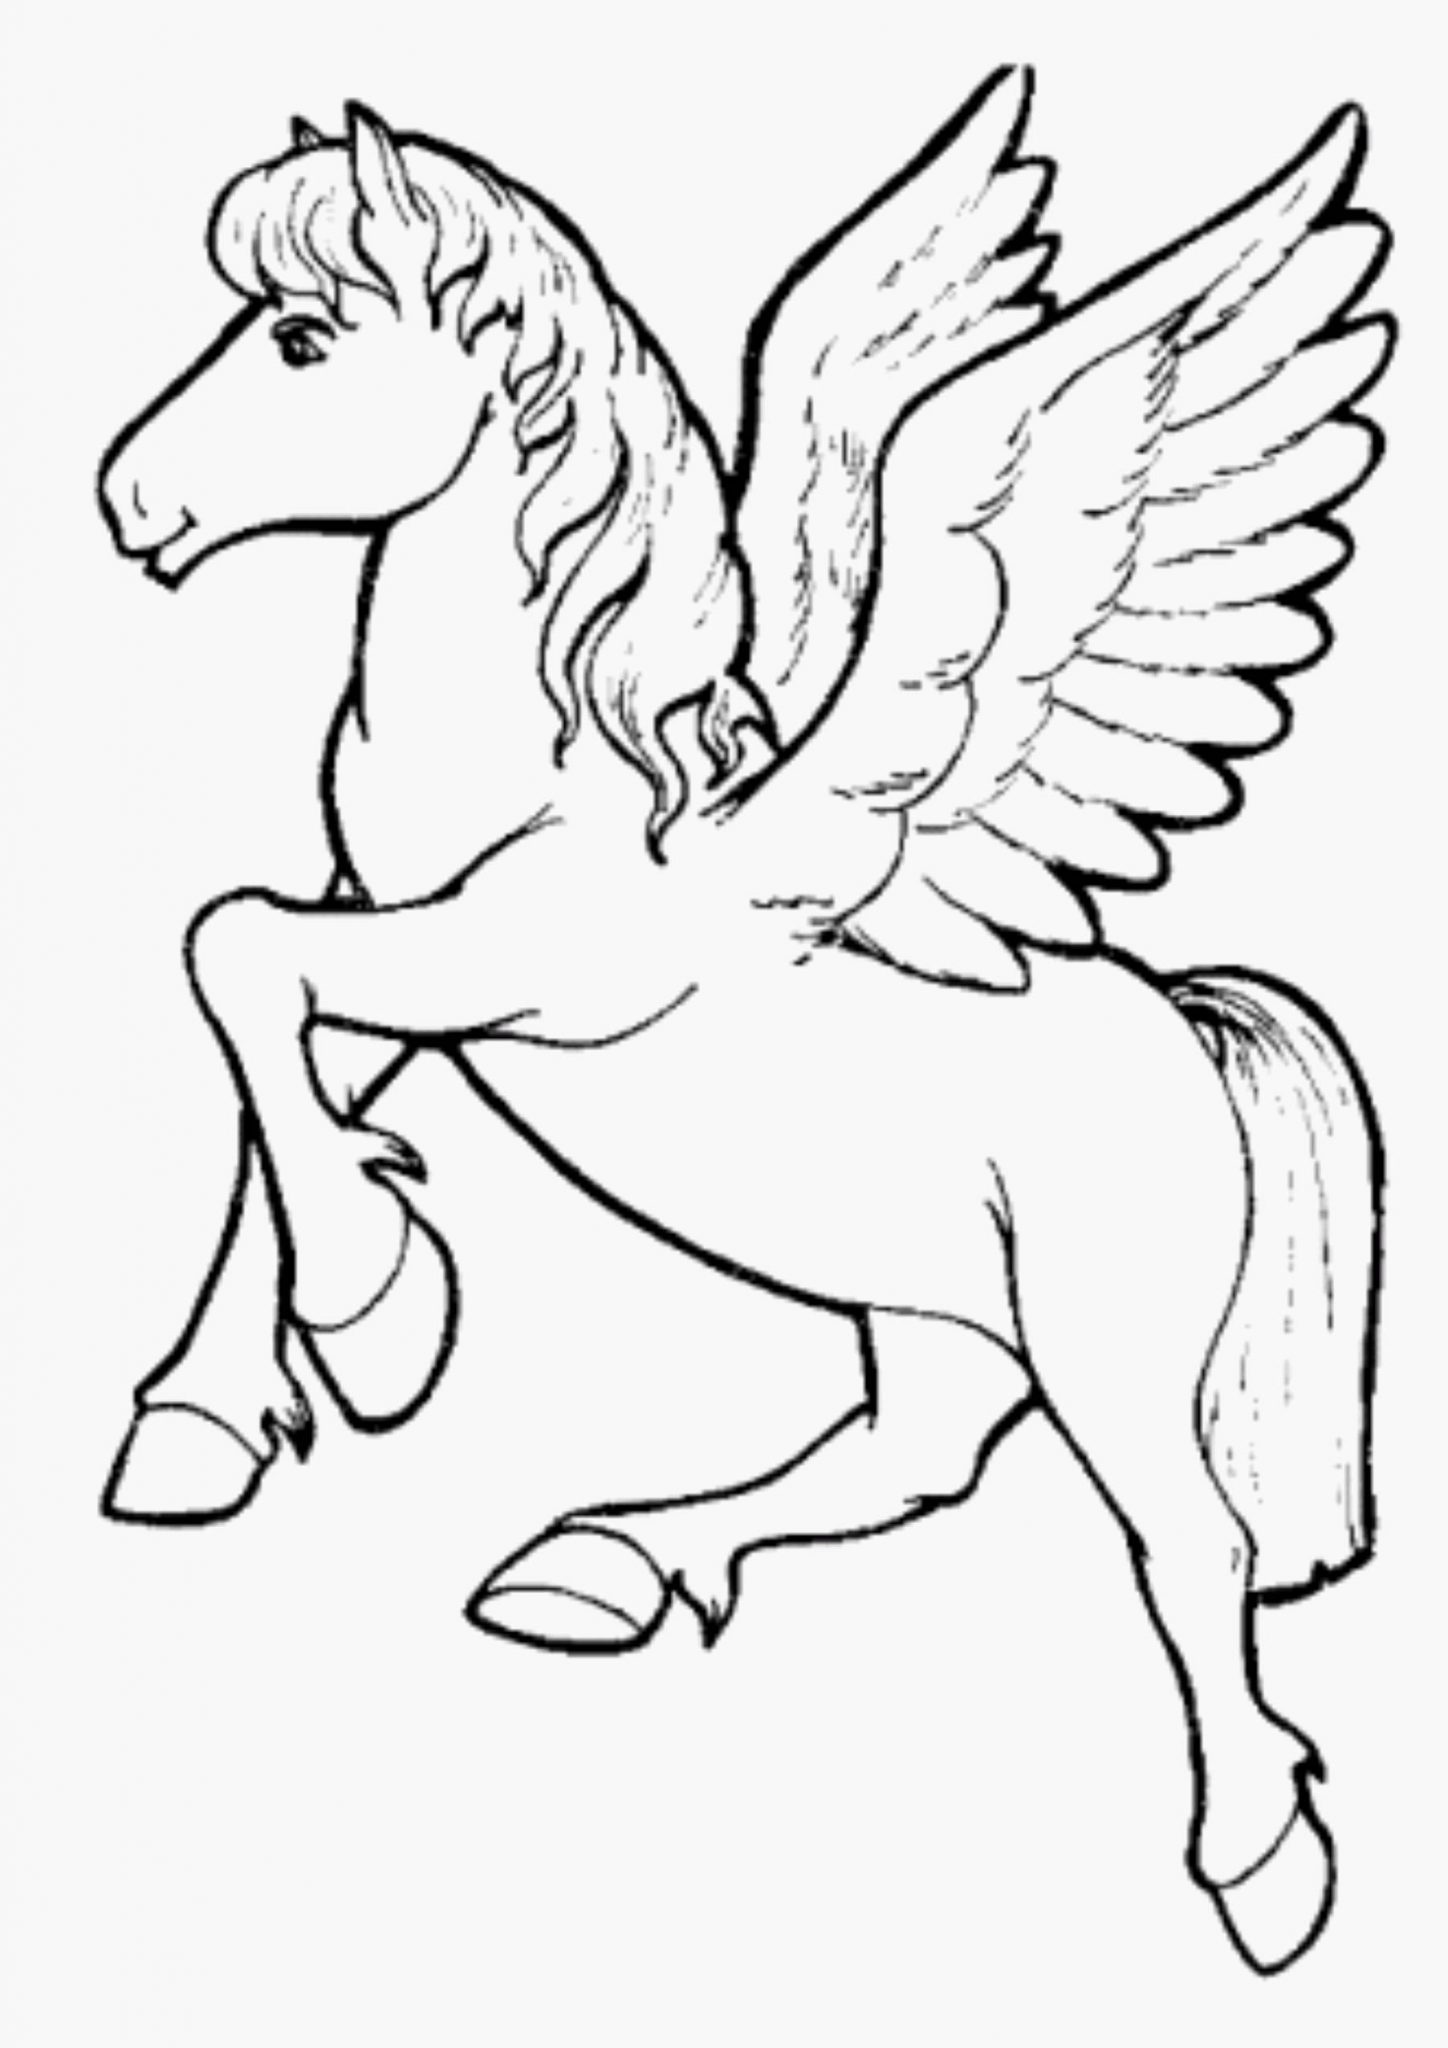 Print & Download - Unicorn Coloring Pages for Children